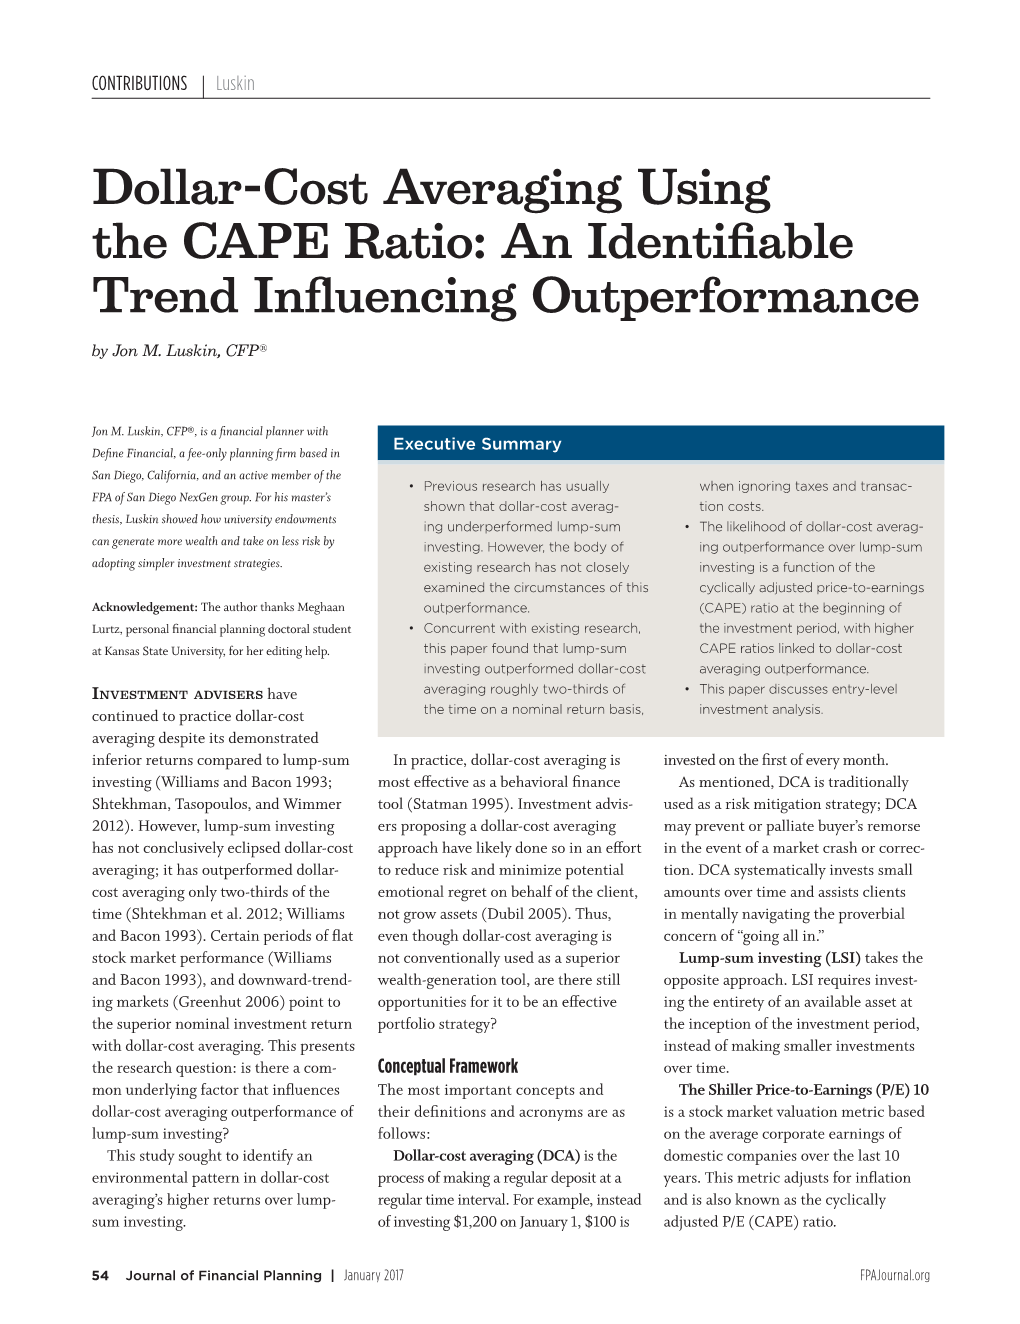 Dollar-Cost Averaging Using the CAPE Ratio: an Identiﬁable Trend Inﬂuencing Outperformance by Jon M